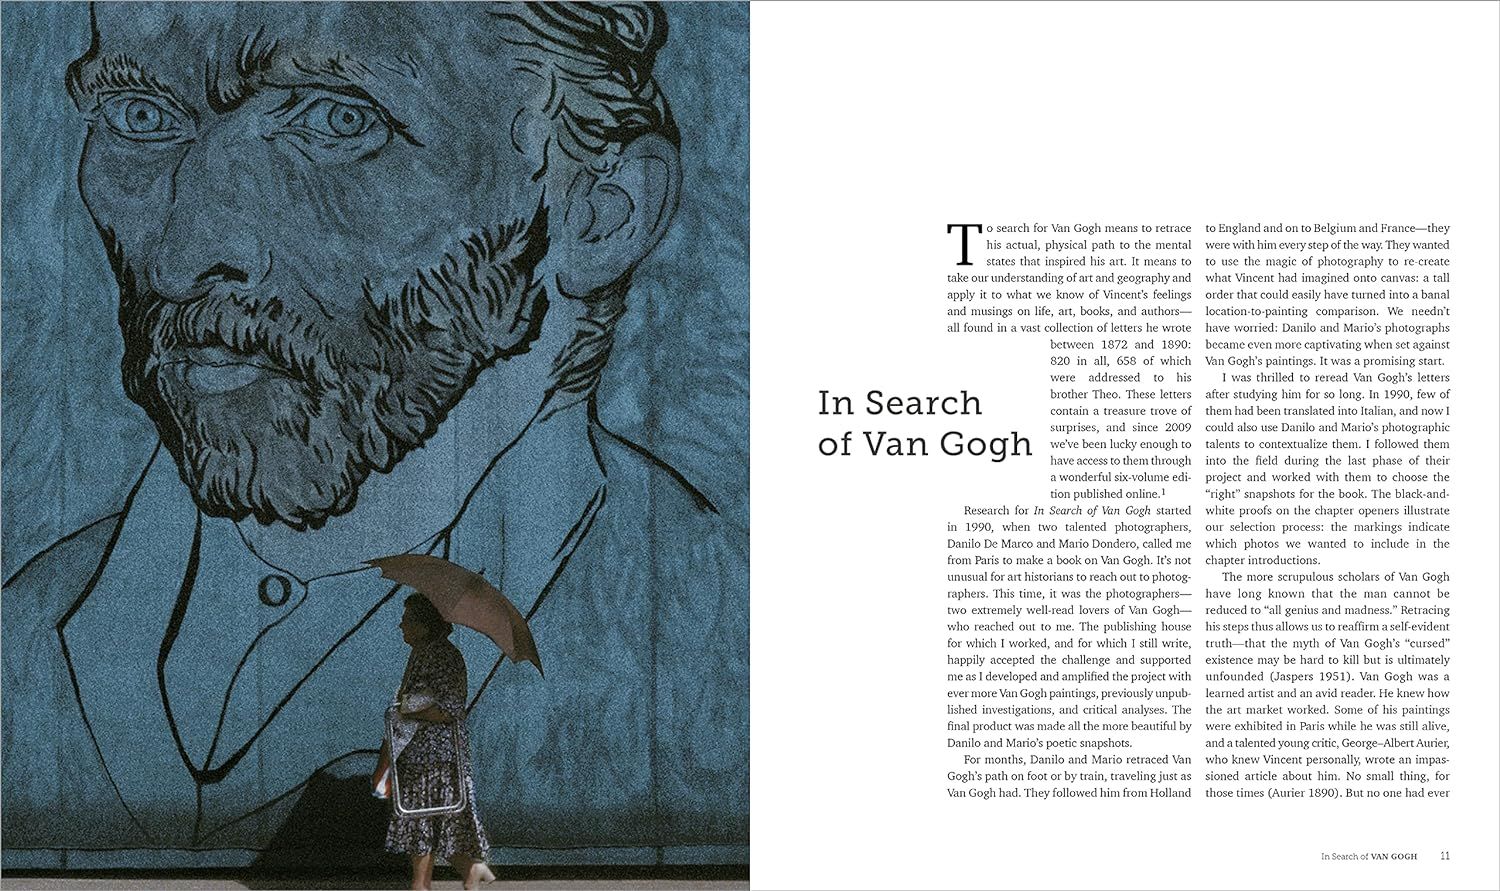  In Search of Van Gogh: Capturing the Life of the Artist Through Photographs and Paintings 